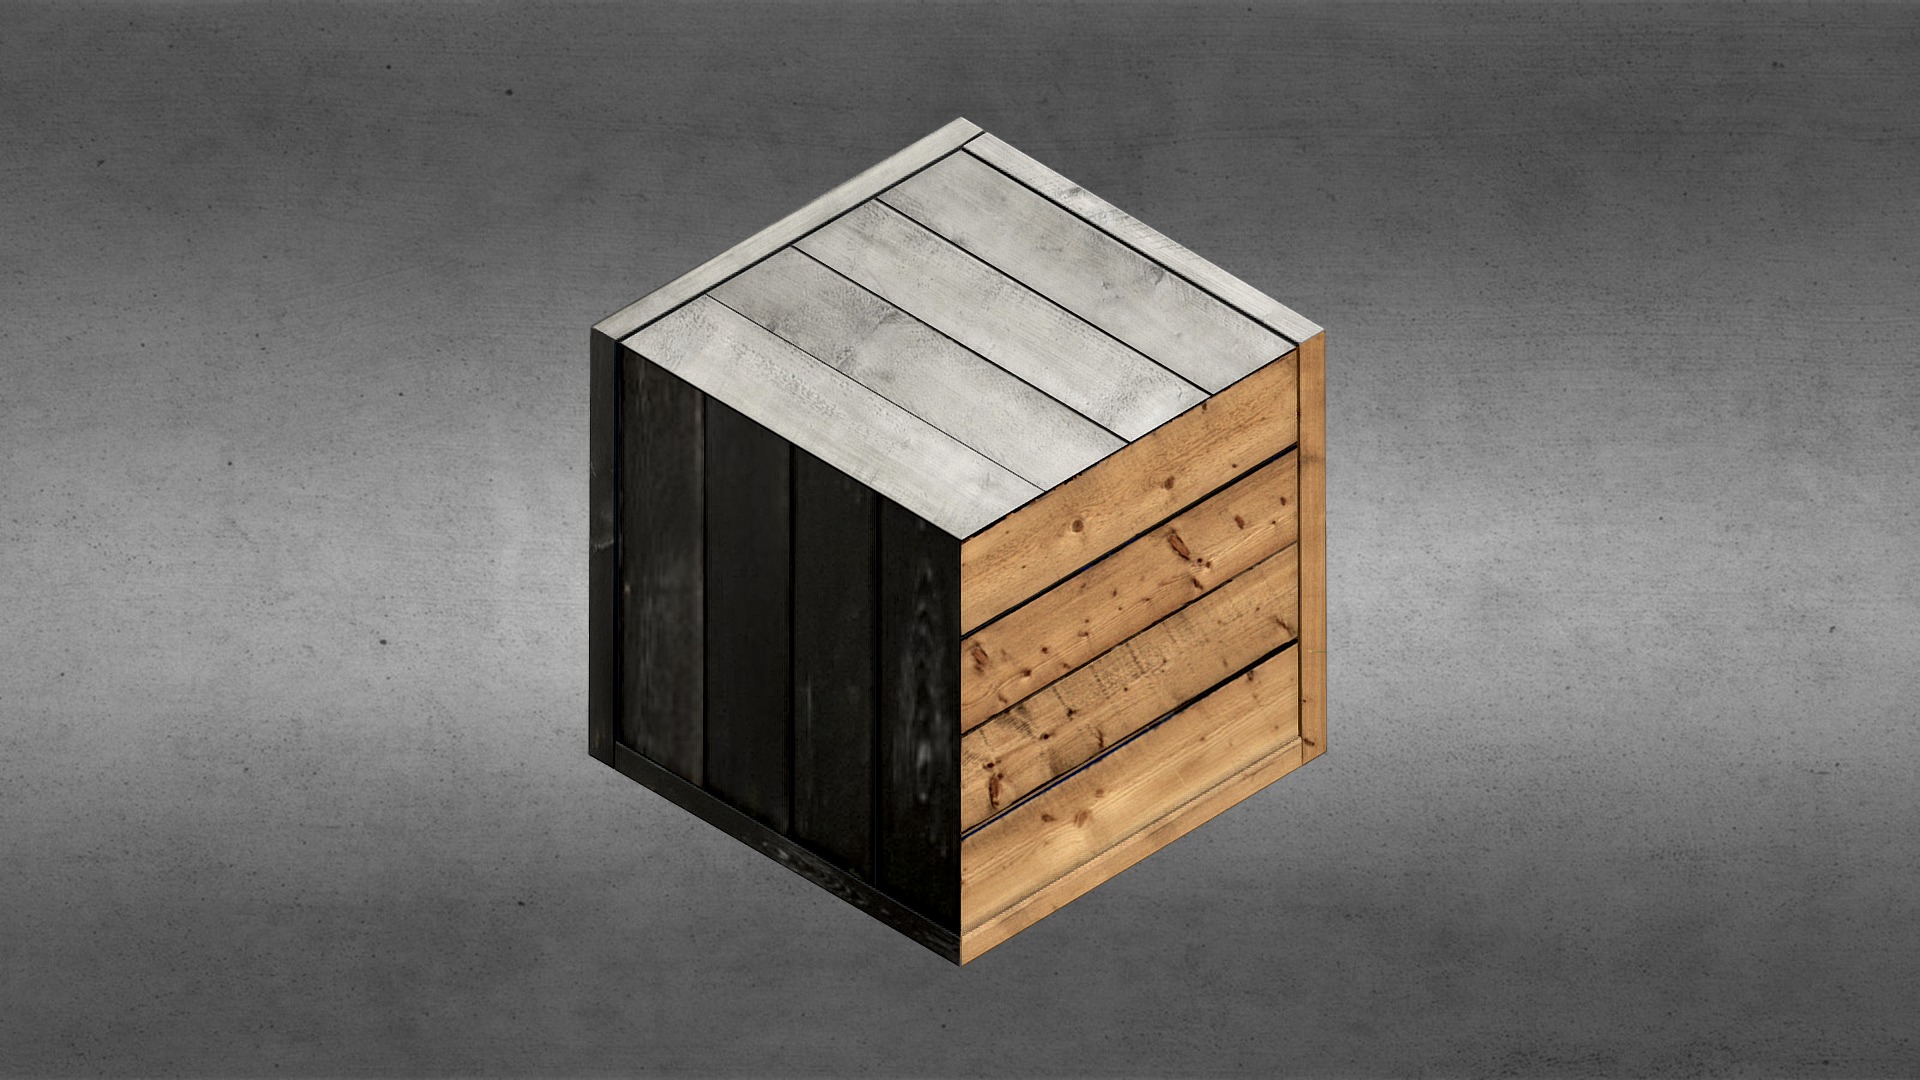 3D model Wood Wall Art - This is a 3D model of the Wood Wall Art. The 3D model is about a wooden box on a grey surface.